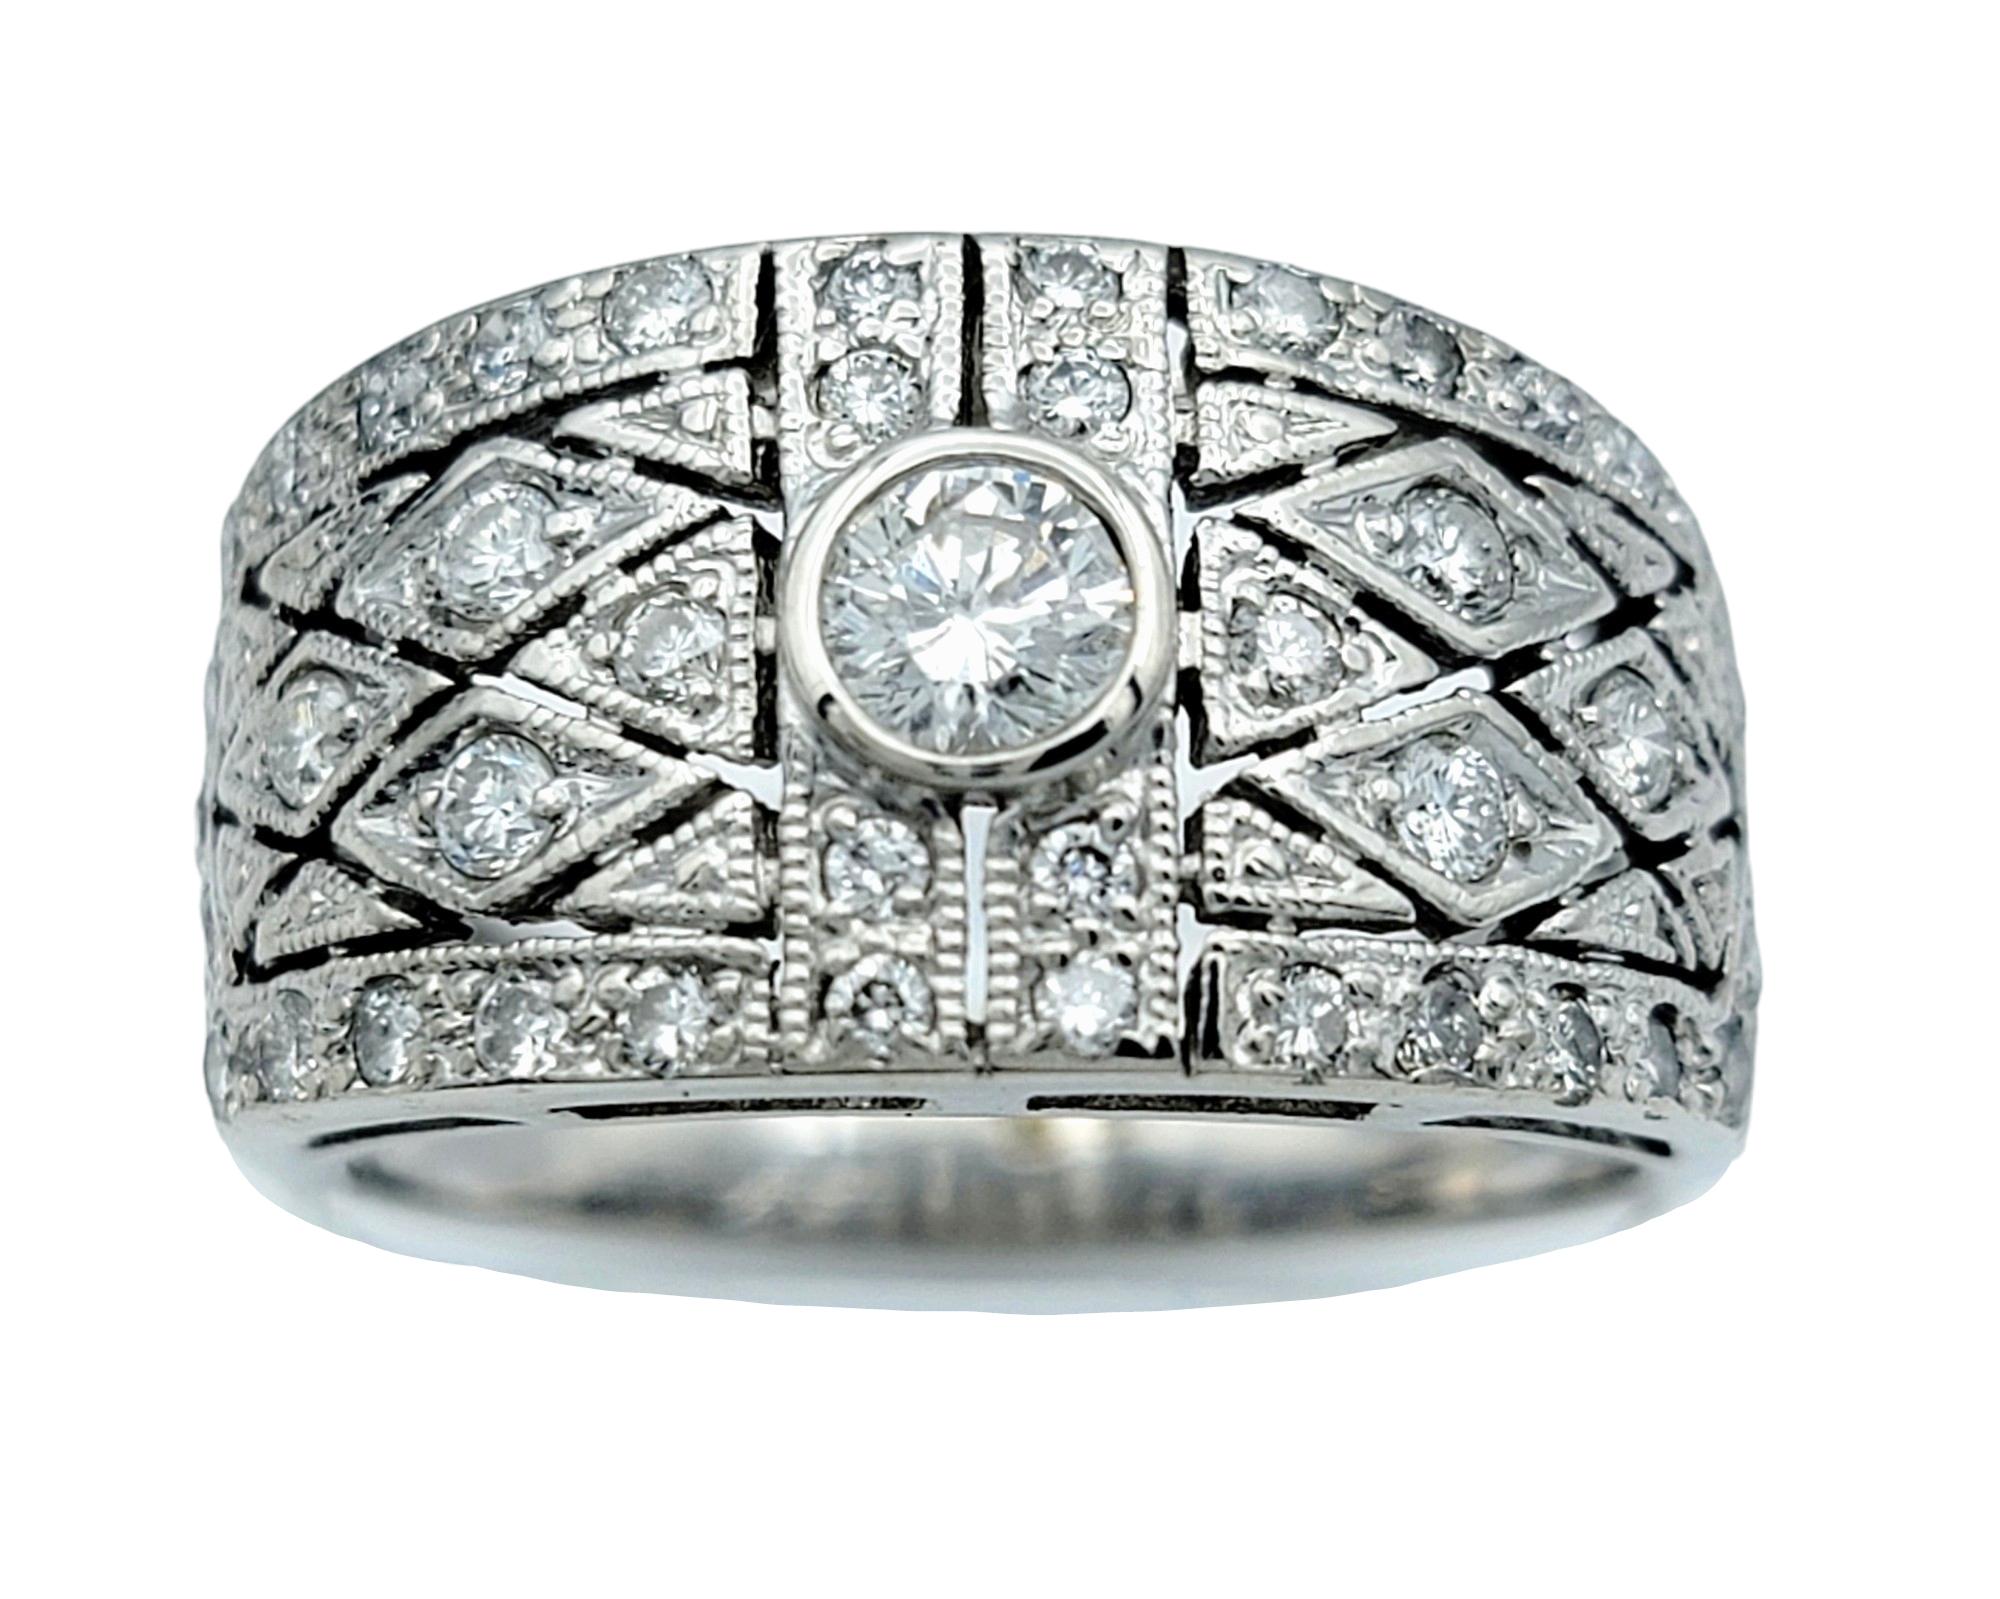 Ring Size: 7.75

This elegant pavé diamond band ring, crafted with meticulous attention to detail in 14 karat white gold. The band features a unique quilted cut-out design that adds a modern twist to the classic pave setting. Each tiny diamond is